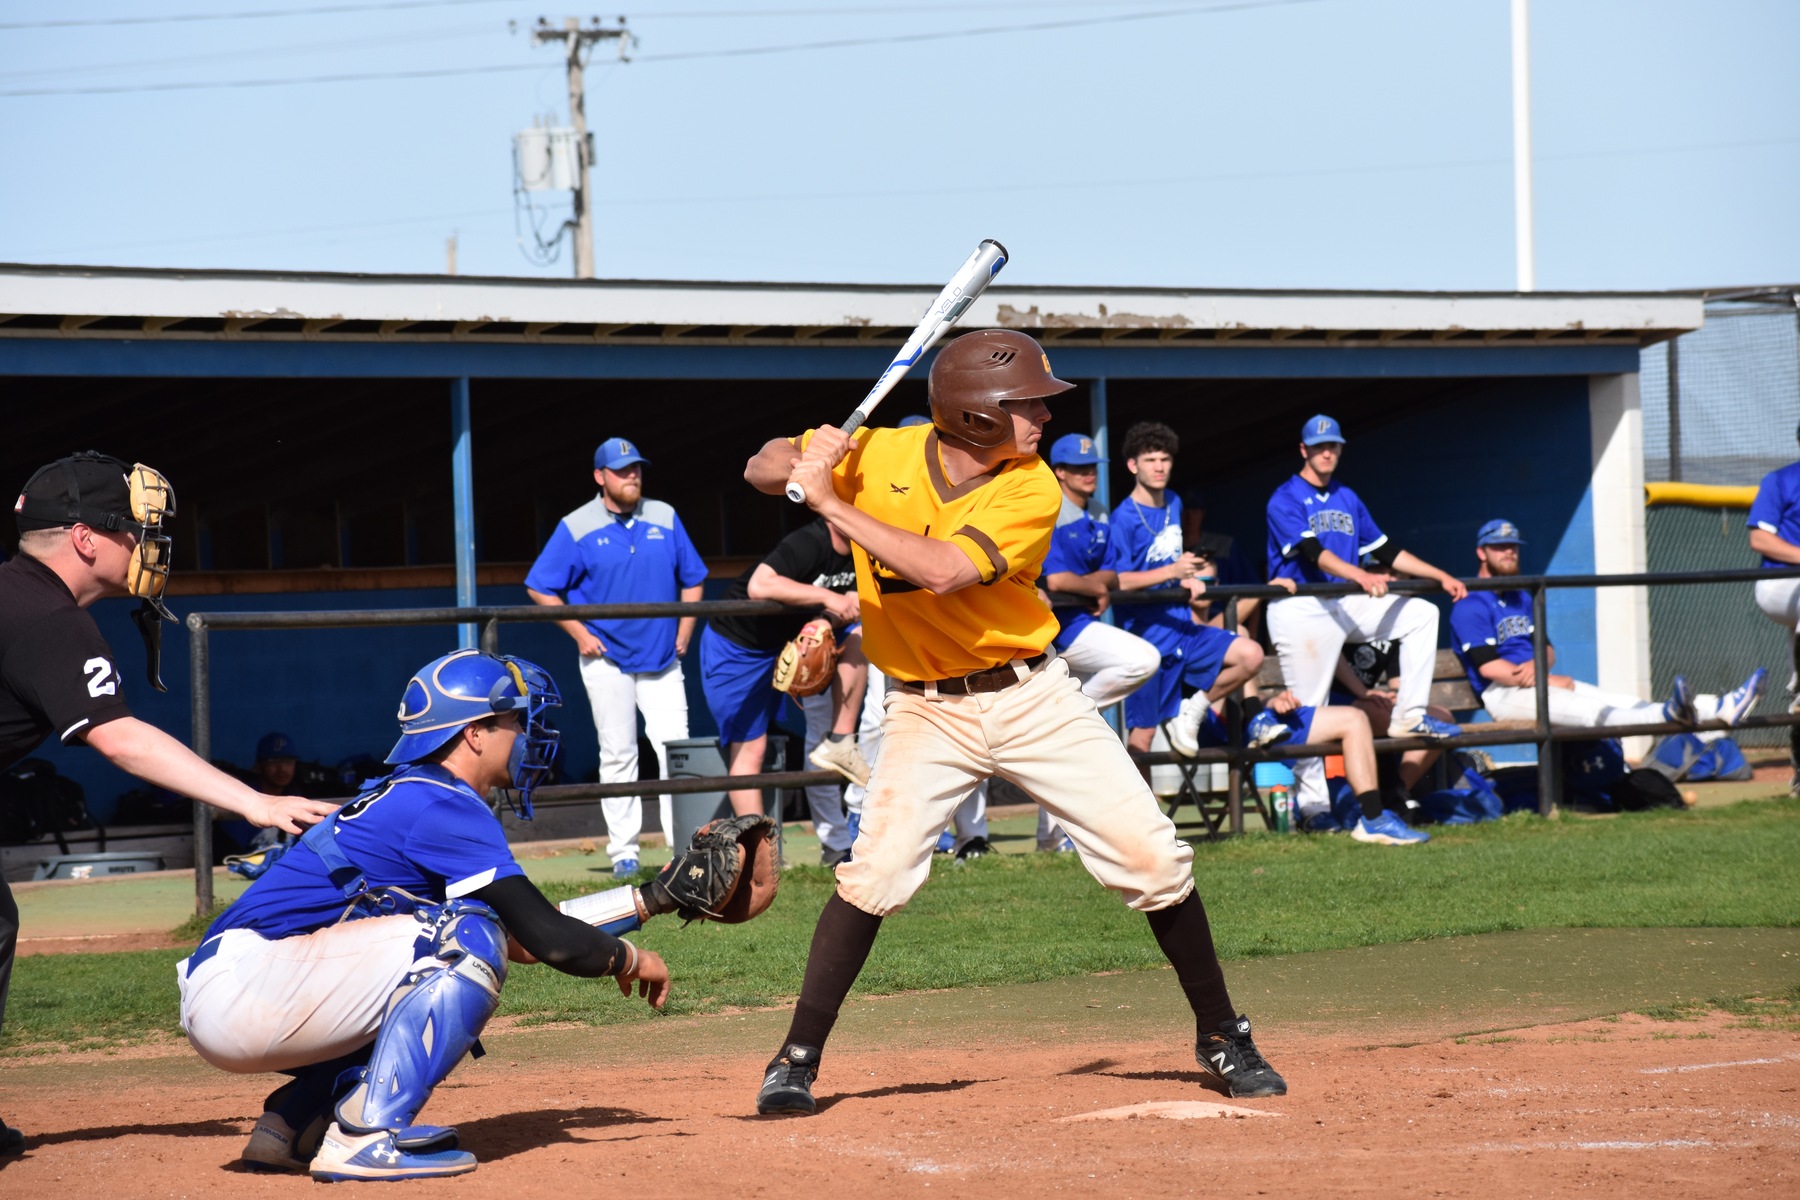 Offensive explosion: Broncbusters finish off Beavers